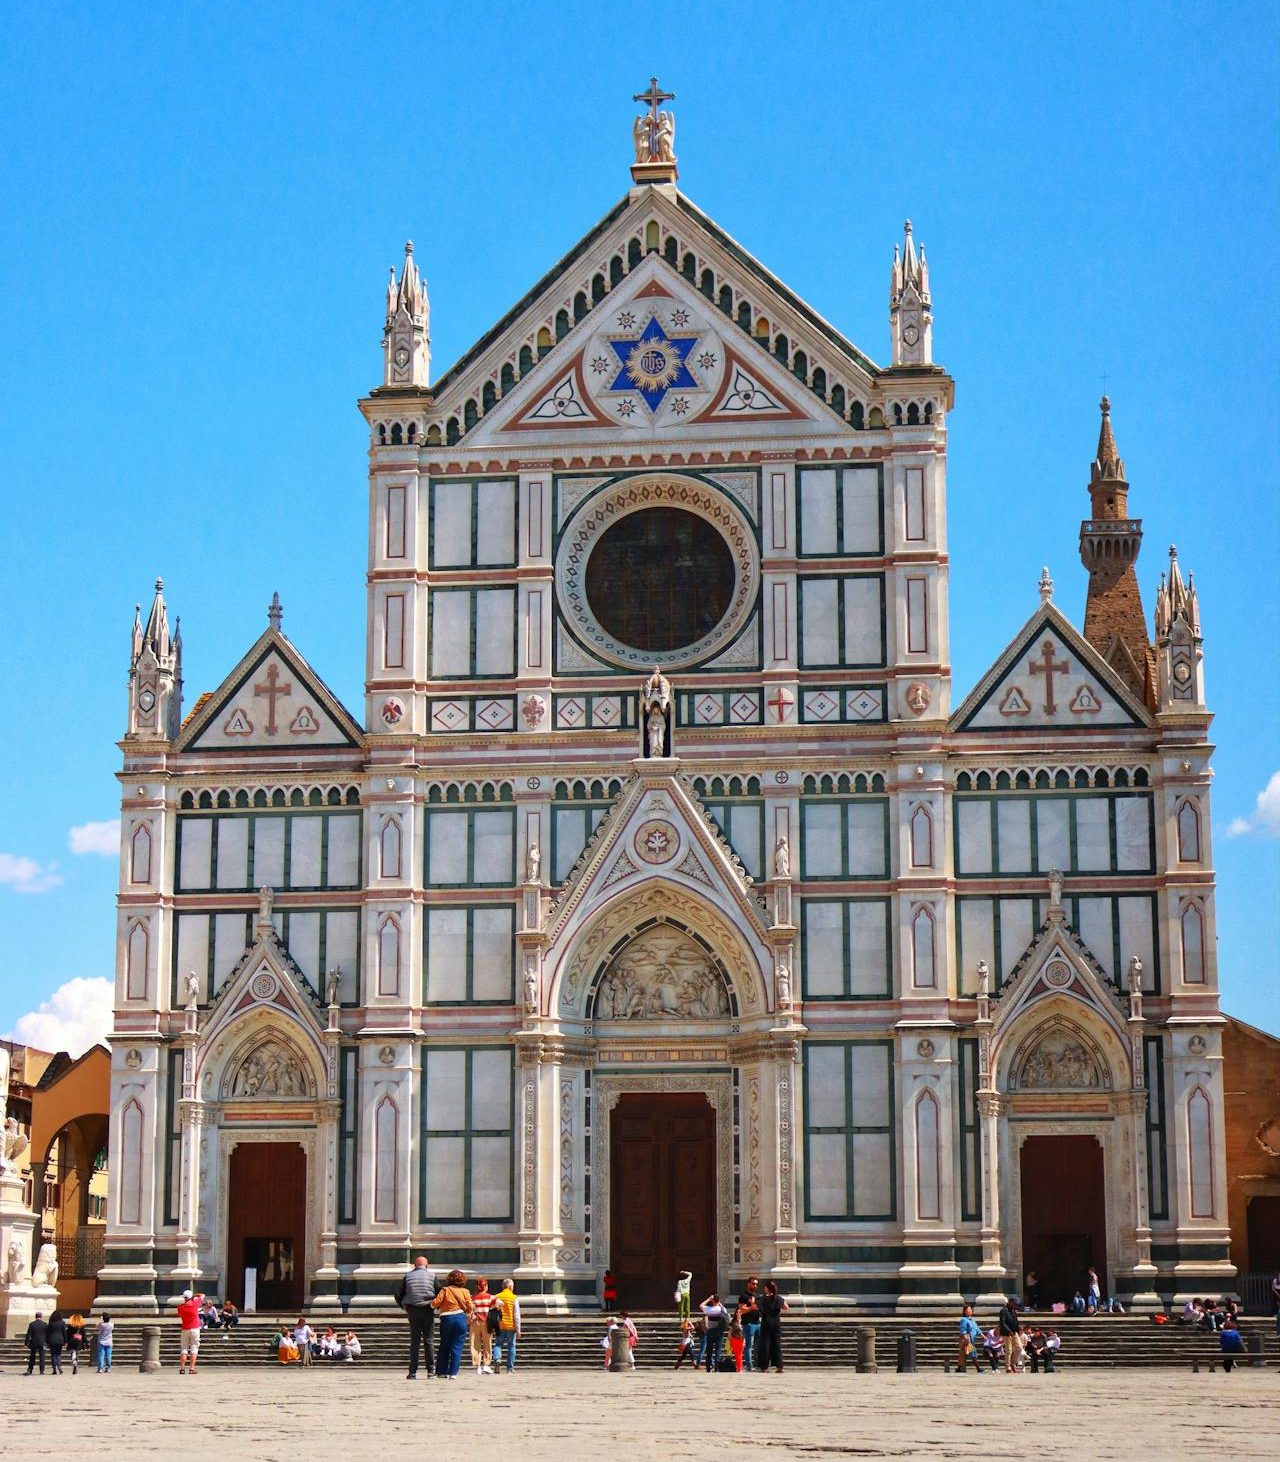 Basilica of Santa Croce, Florence tourist attractions